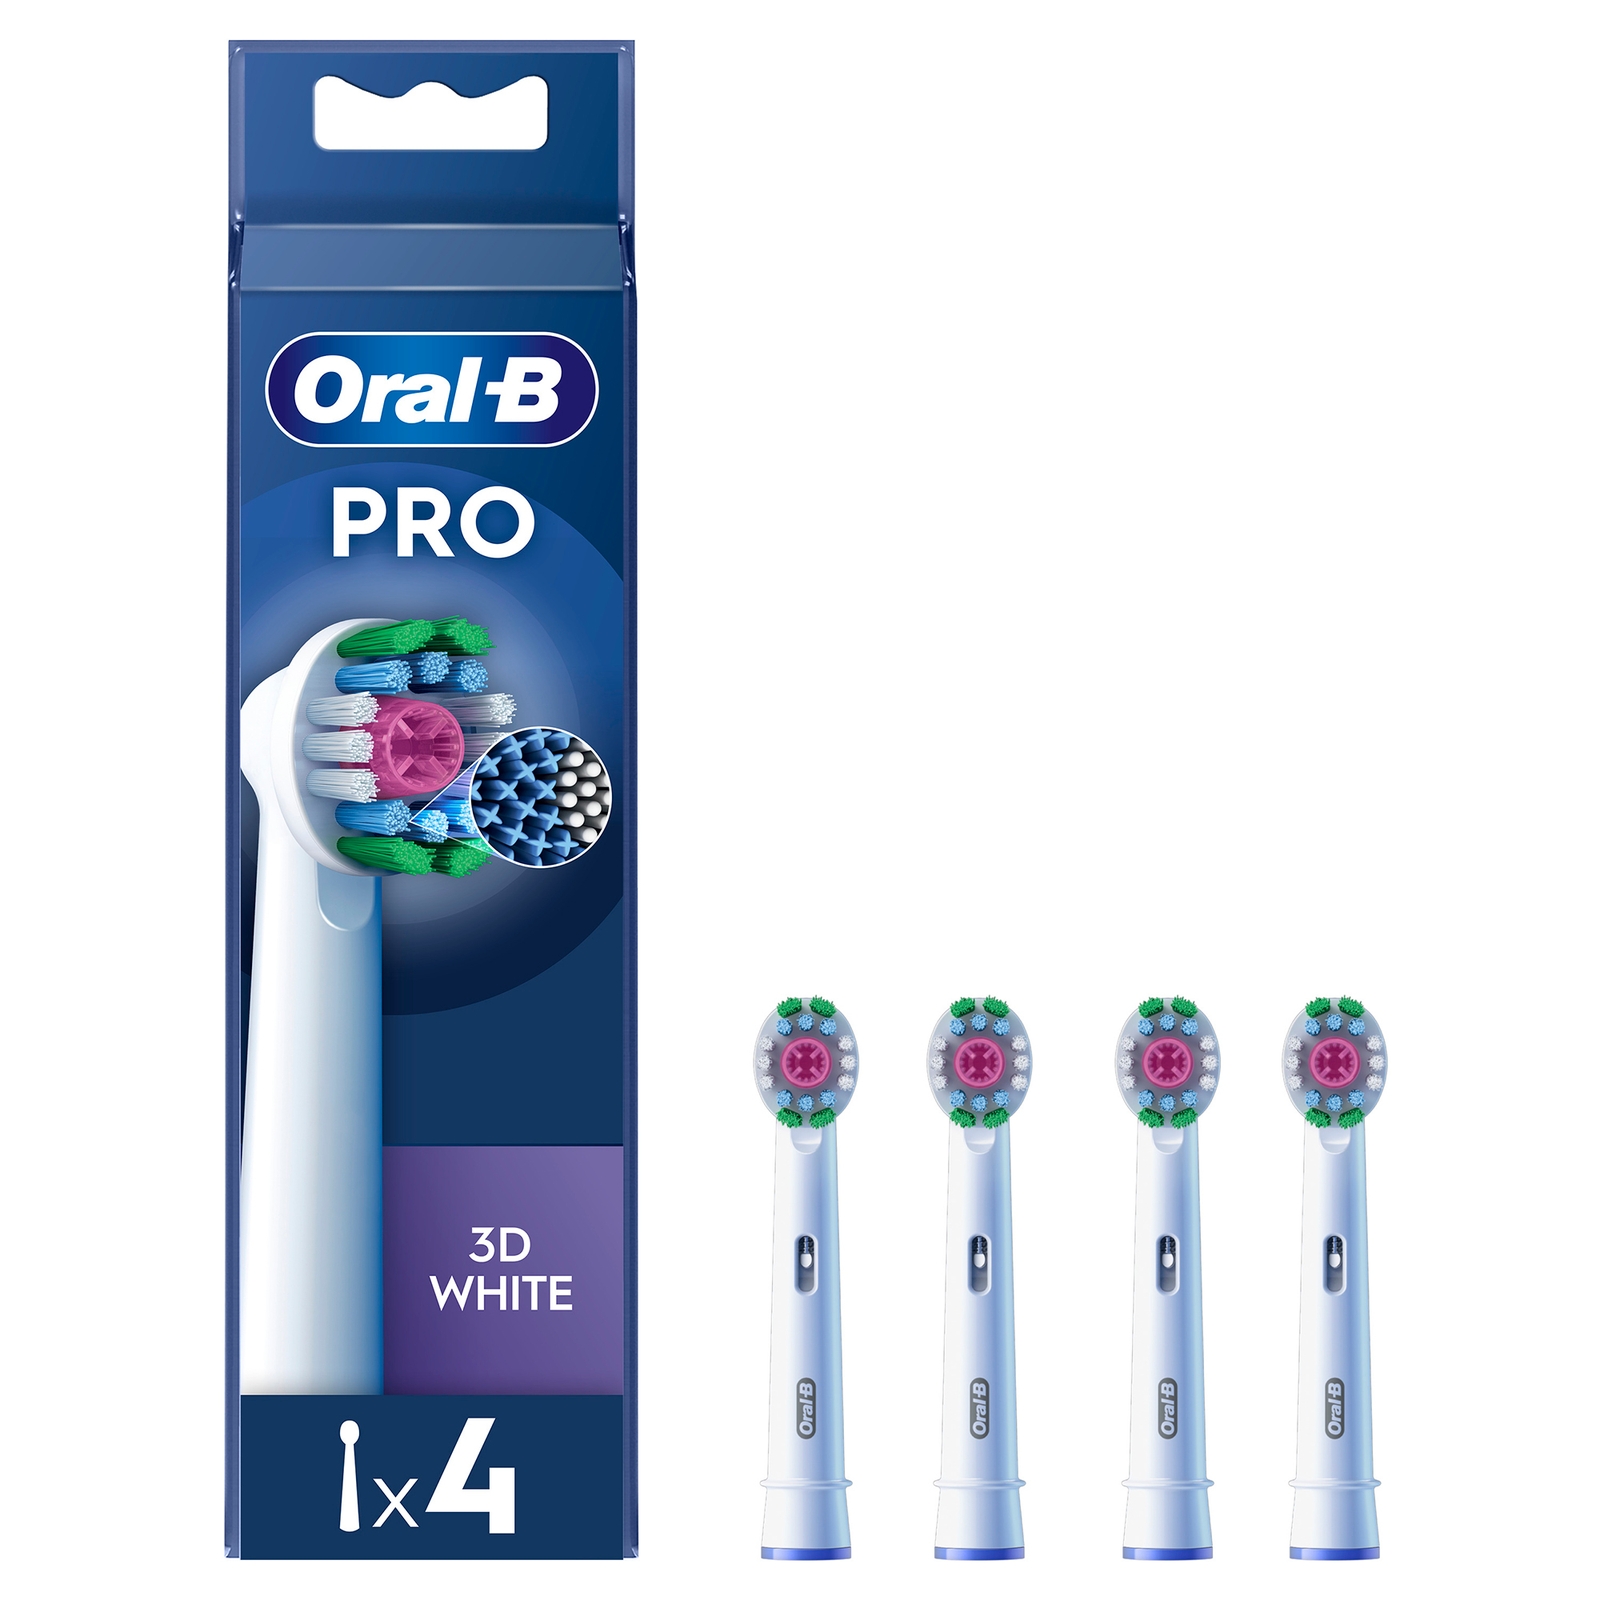 Oral B 3D White Toothbrush Head - Pack of 4 Counts